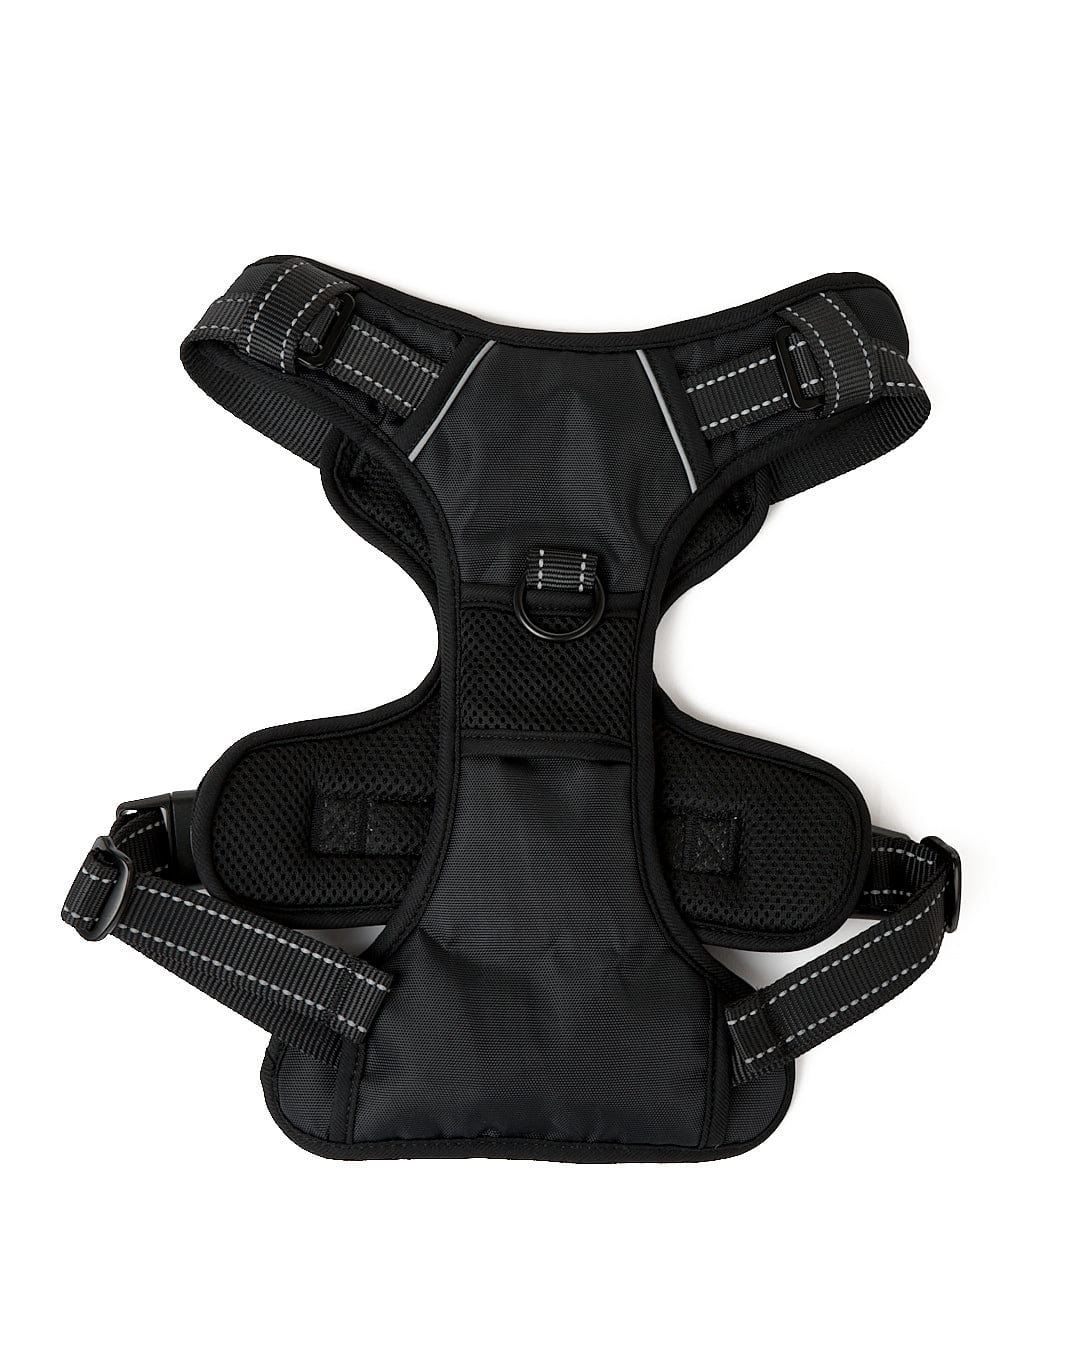 A Saltrock branded black pet harness with adjustable straps on a white background.